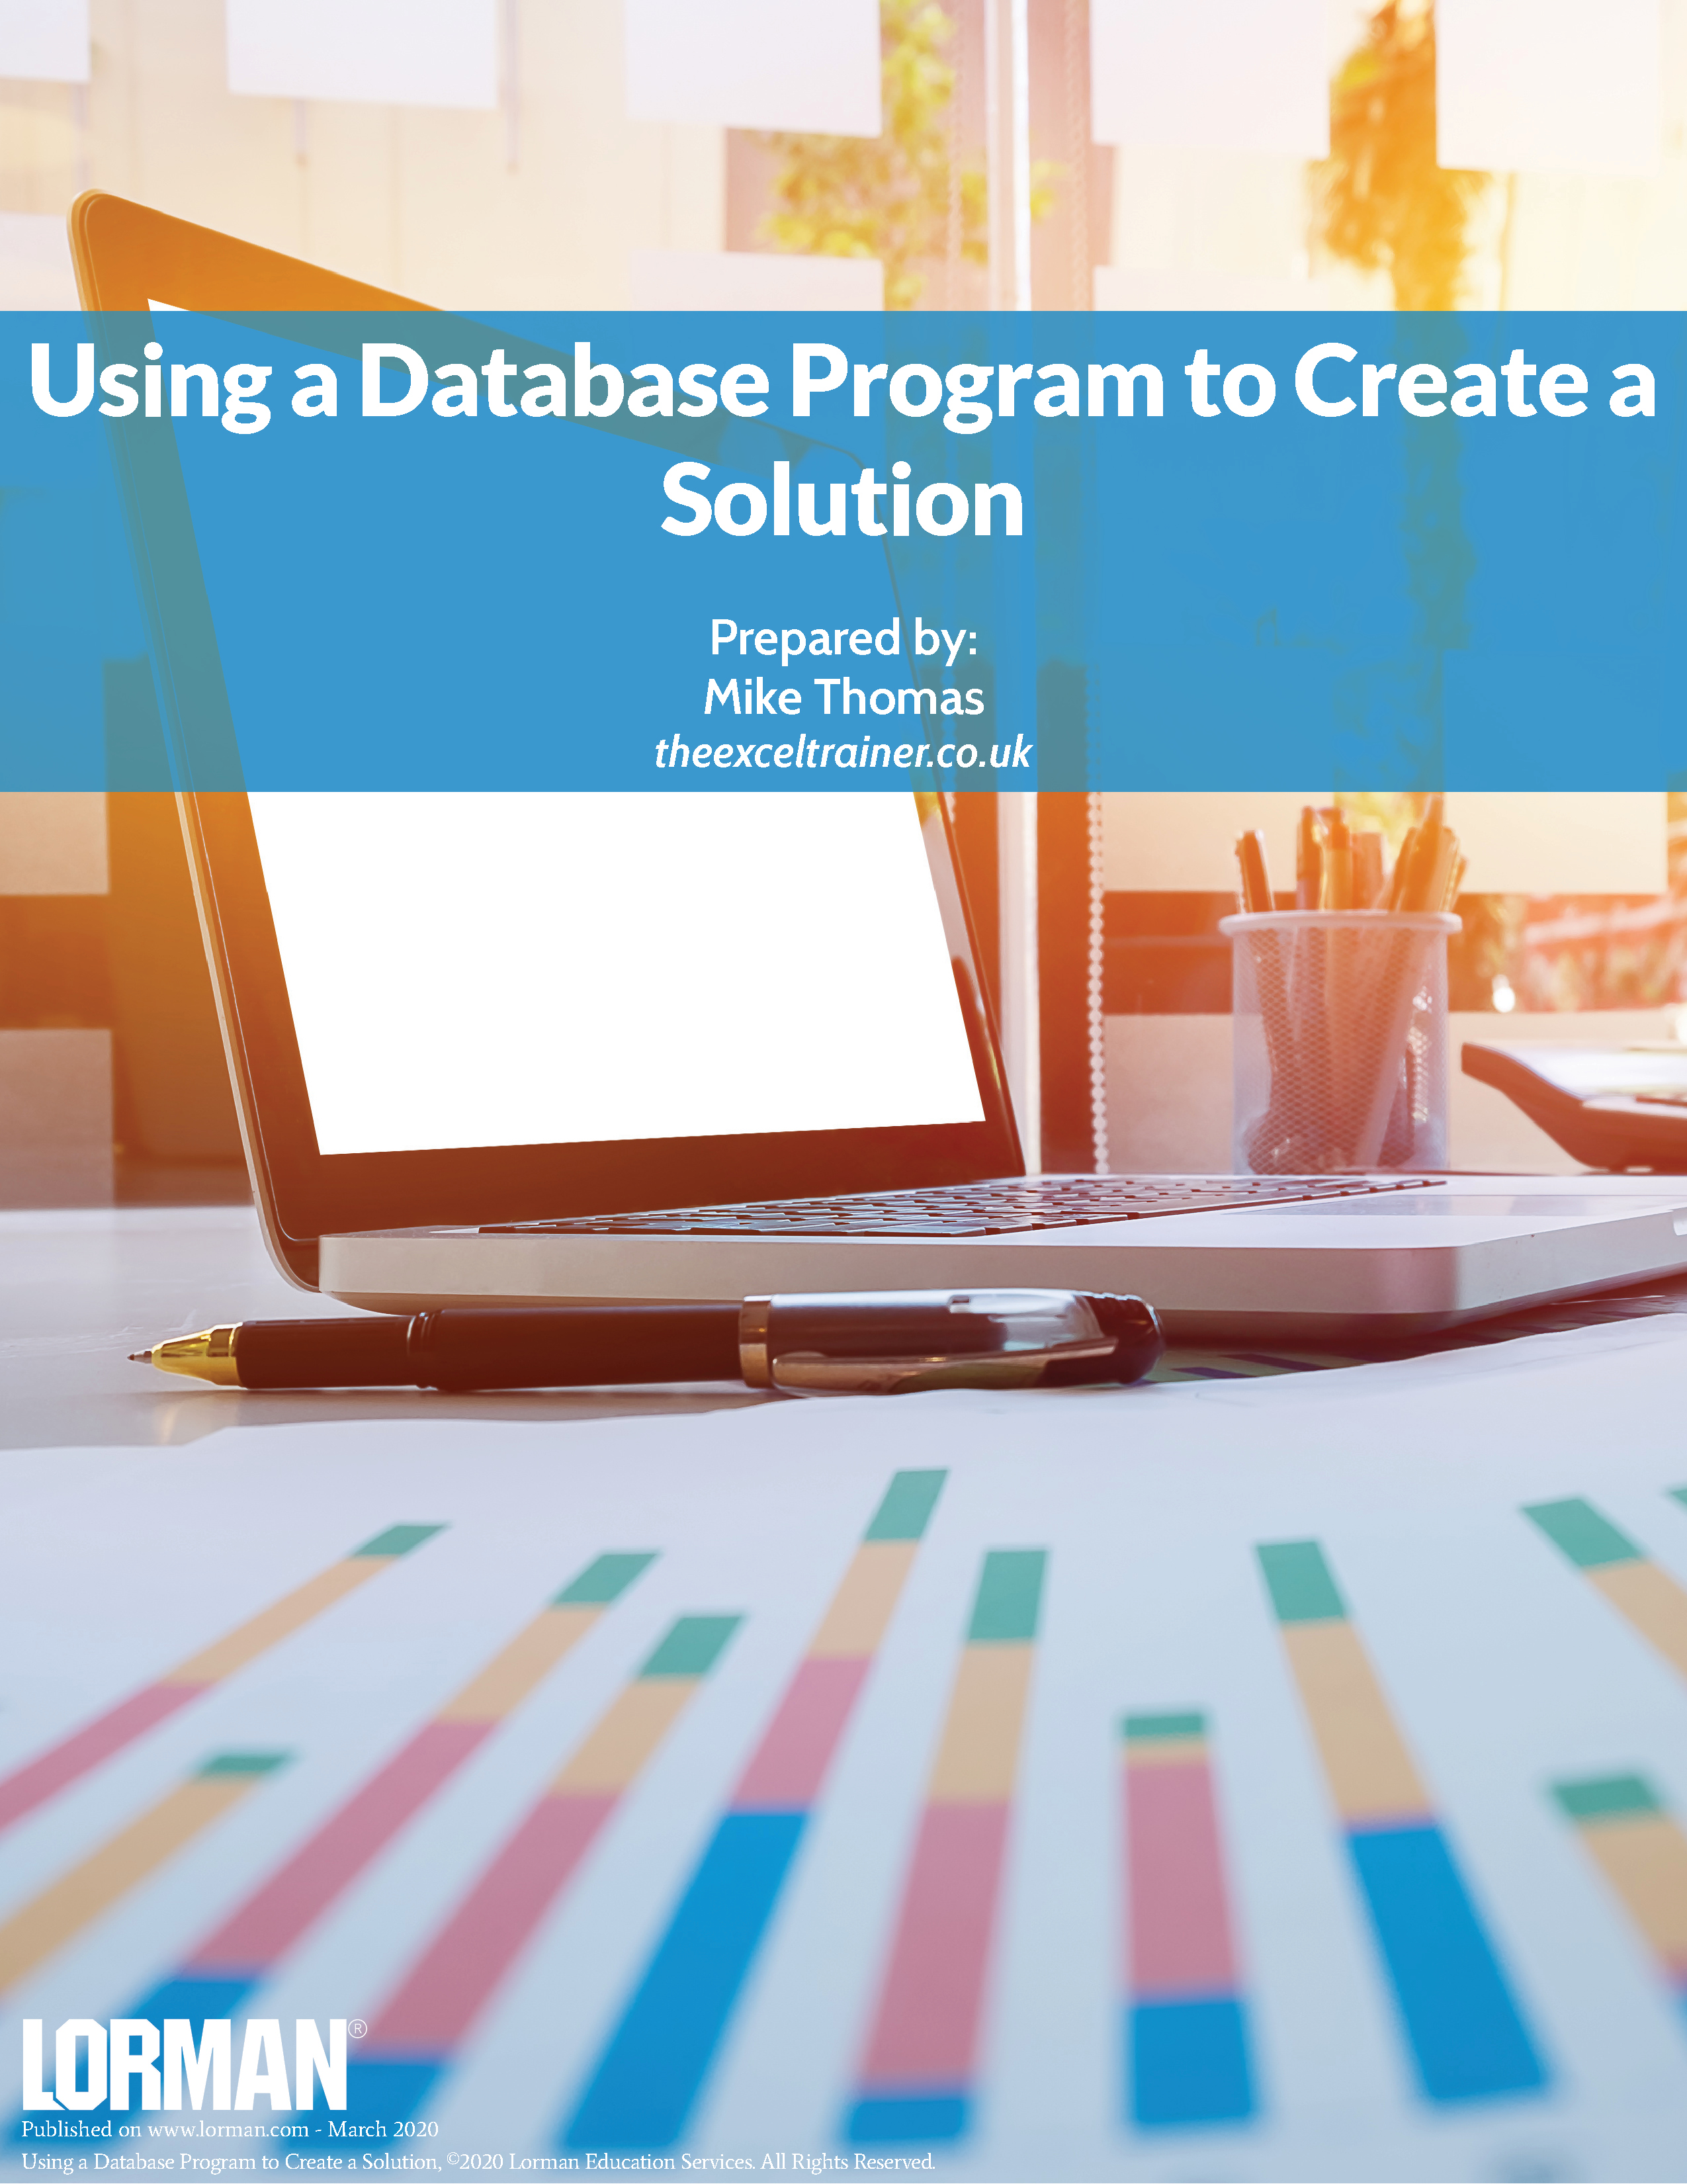 Using a Database Program to Create a Solution